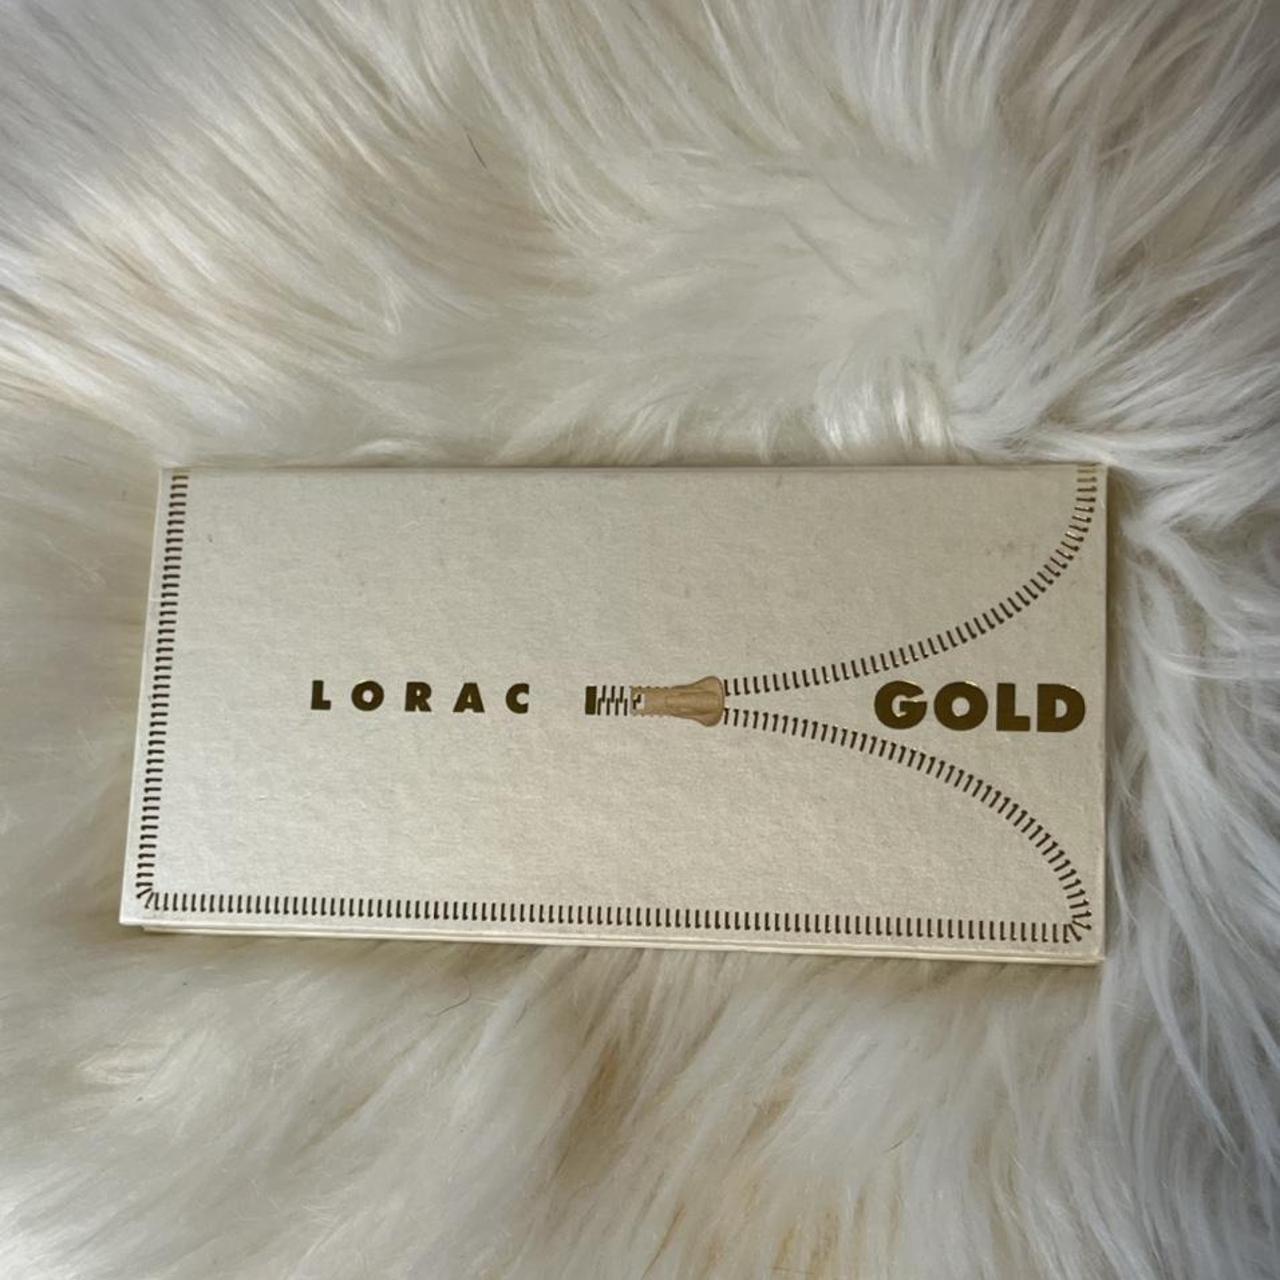 Product Image 1 - Lorac Unzipped Gold eyeshadow palette.
(There’s